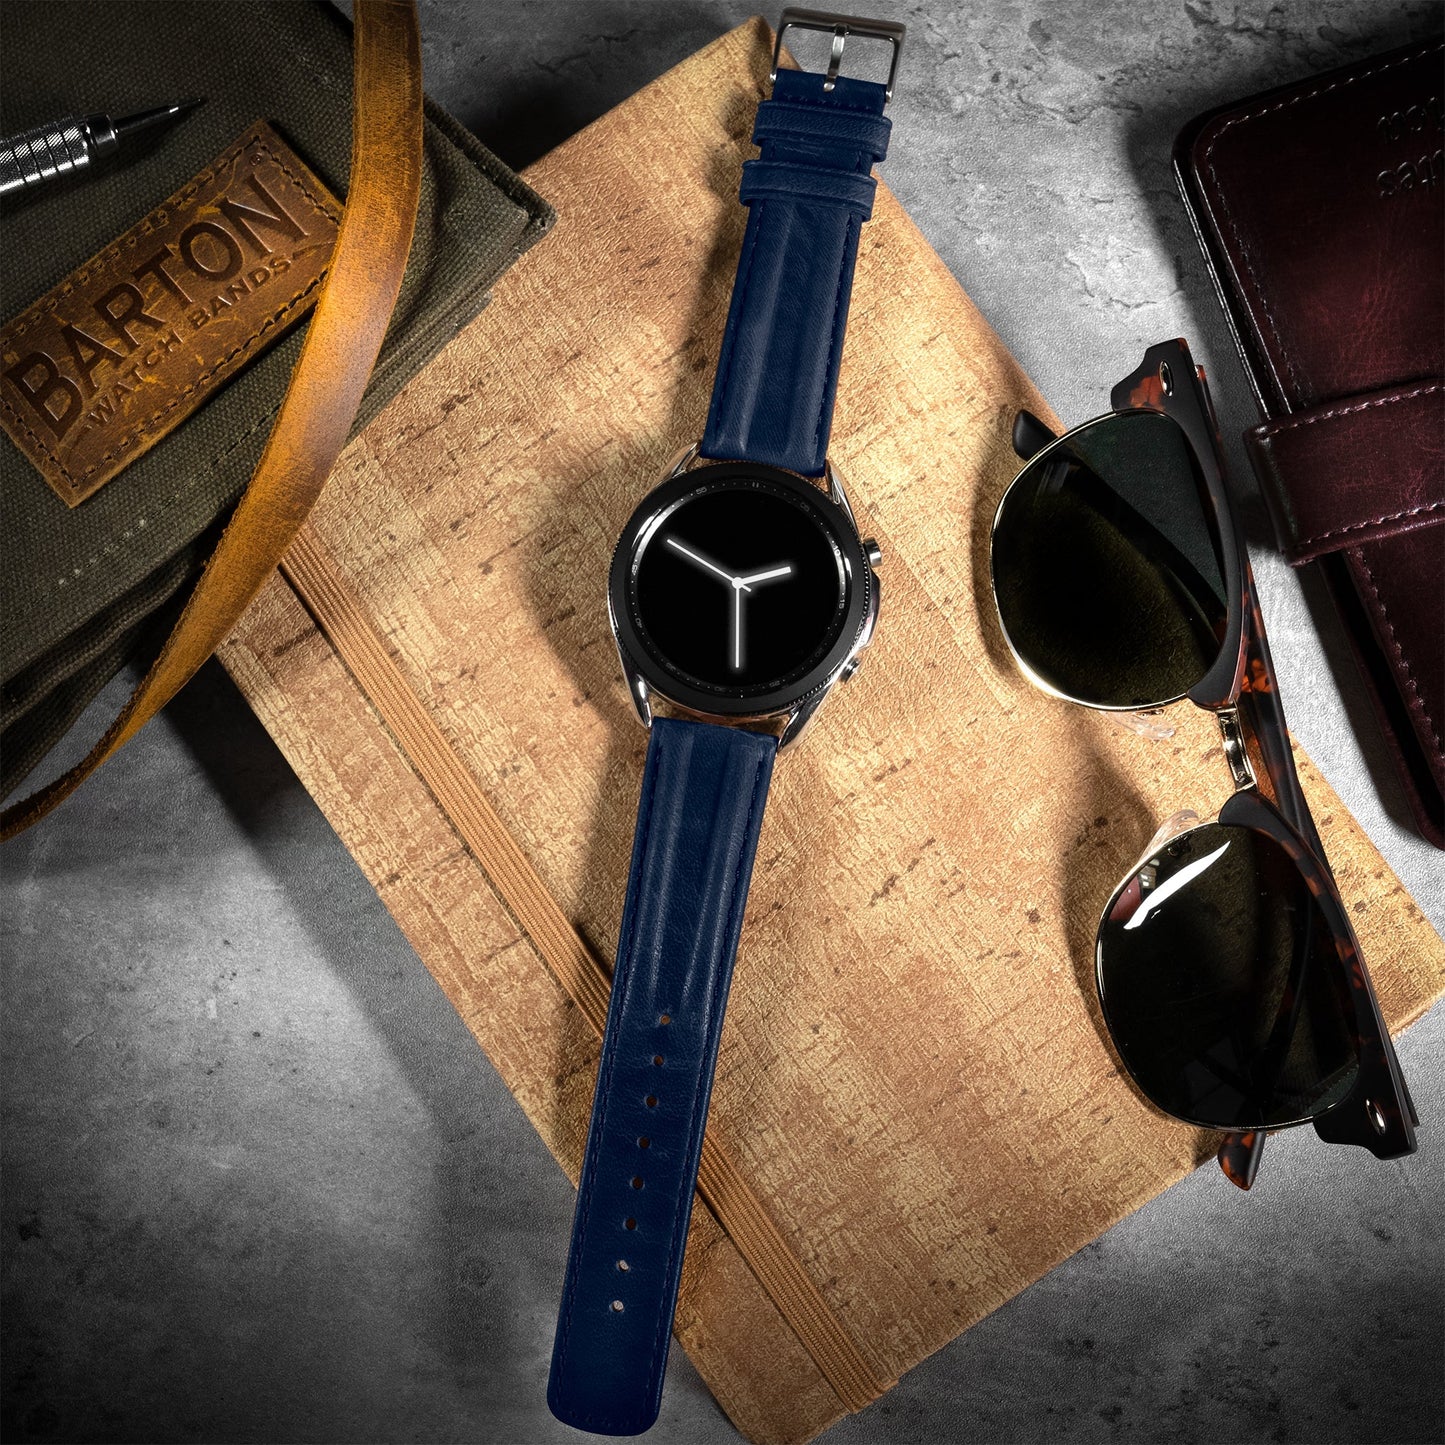 Samsung Galaxy Watch | Classic Horween Leather | Navy Blue - Barton Watch Bands